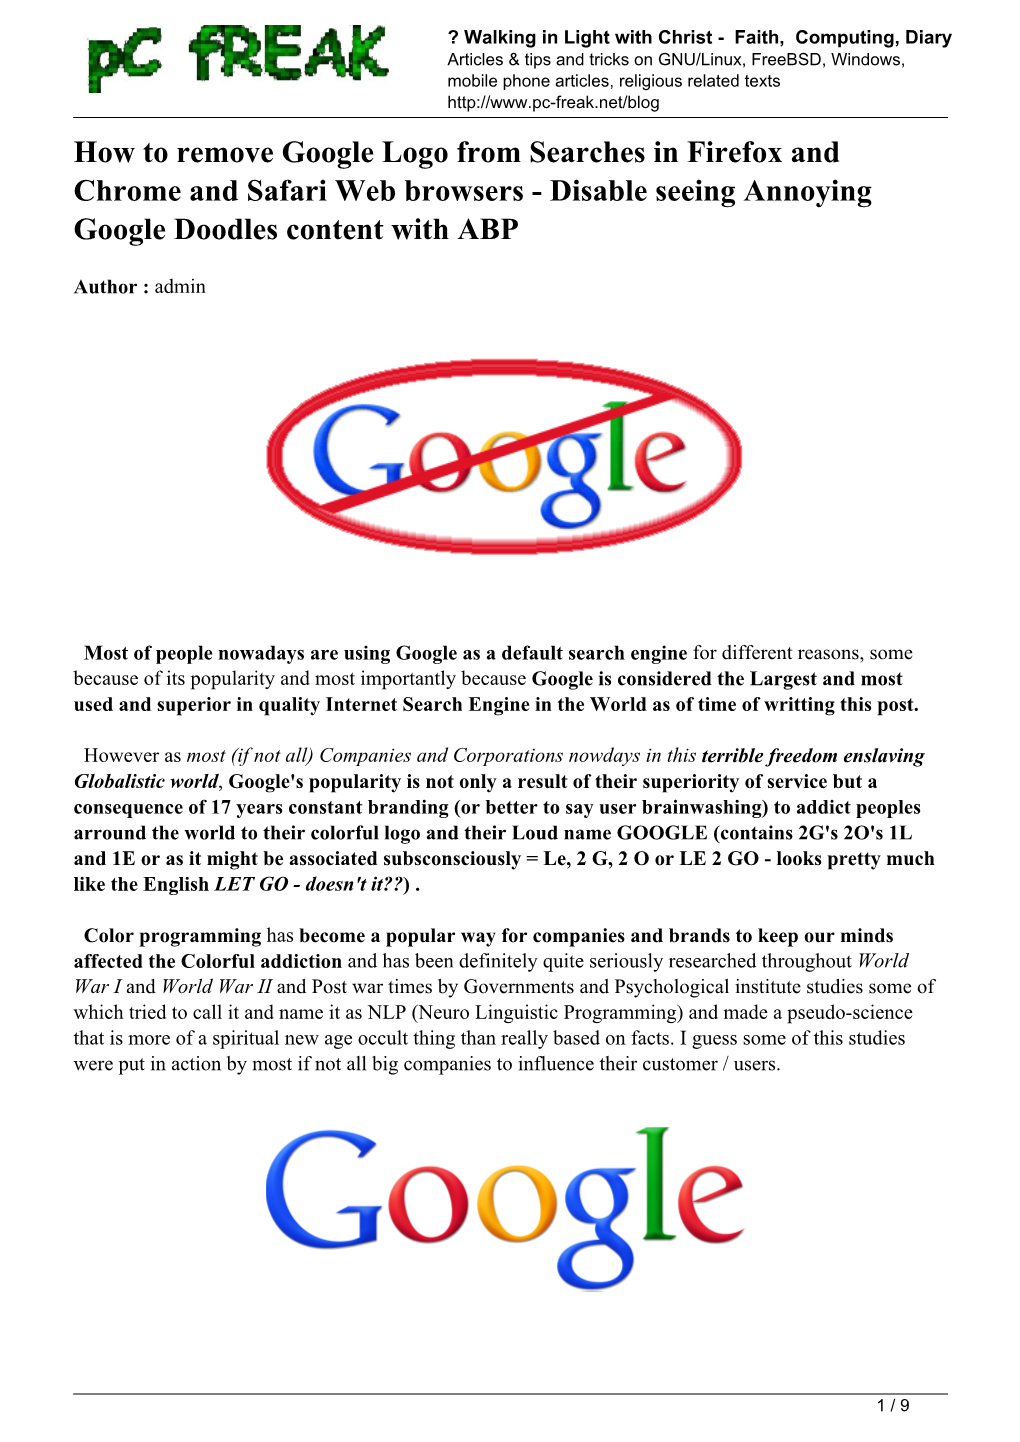 How to Remove Google Logo from Searches in Firefox and Chrome and Safari Web Browsers - Disable Seeing Annoying Google Doodles Content with ABP